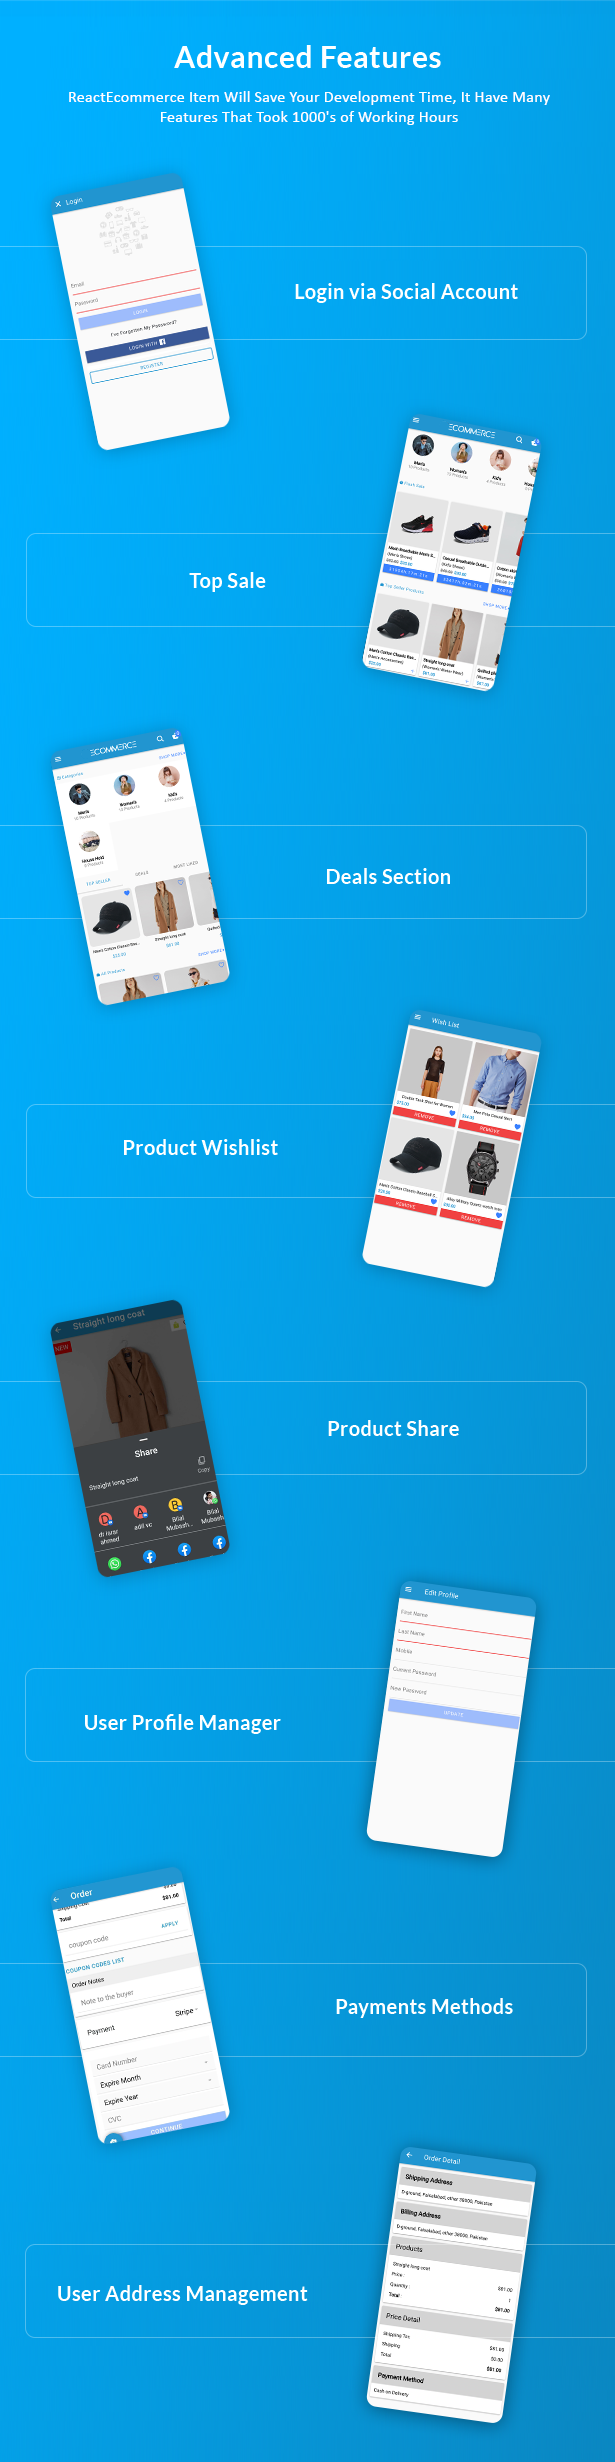 React Ecommerce - Universal iOS & Android Ecommerce / Store Full Mobile App with PHP Laravel CMS - 18